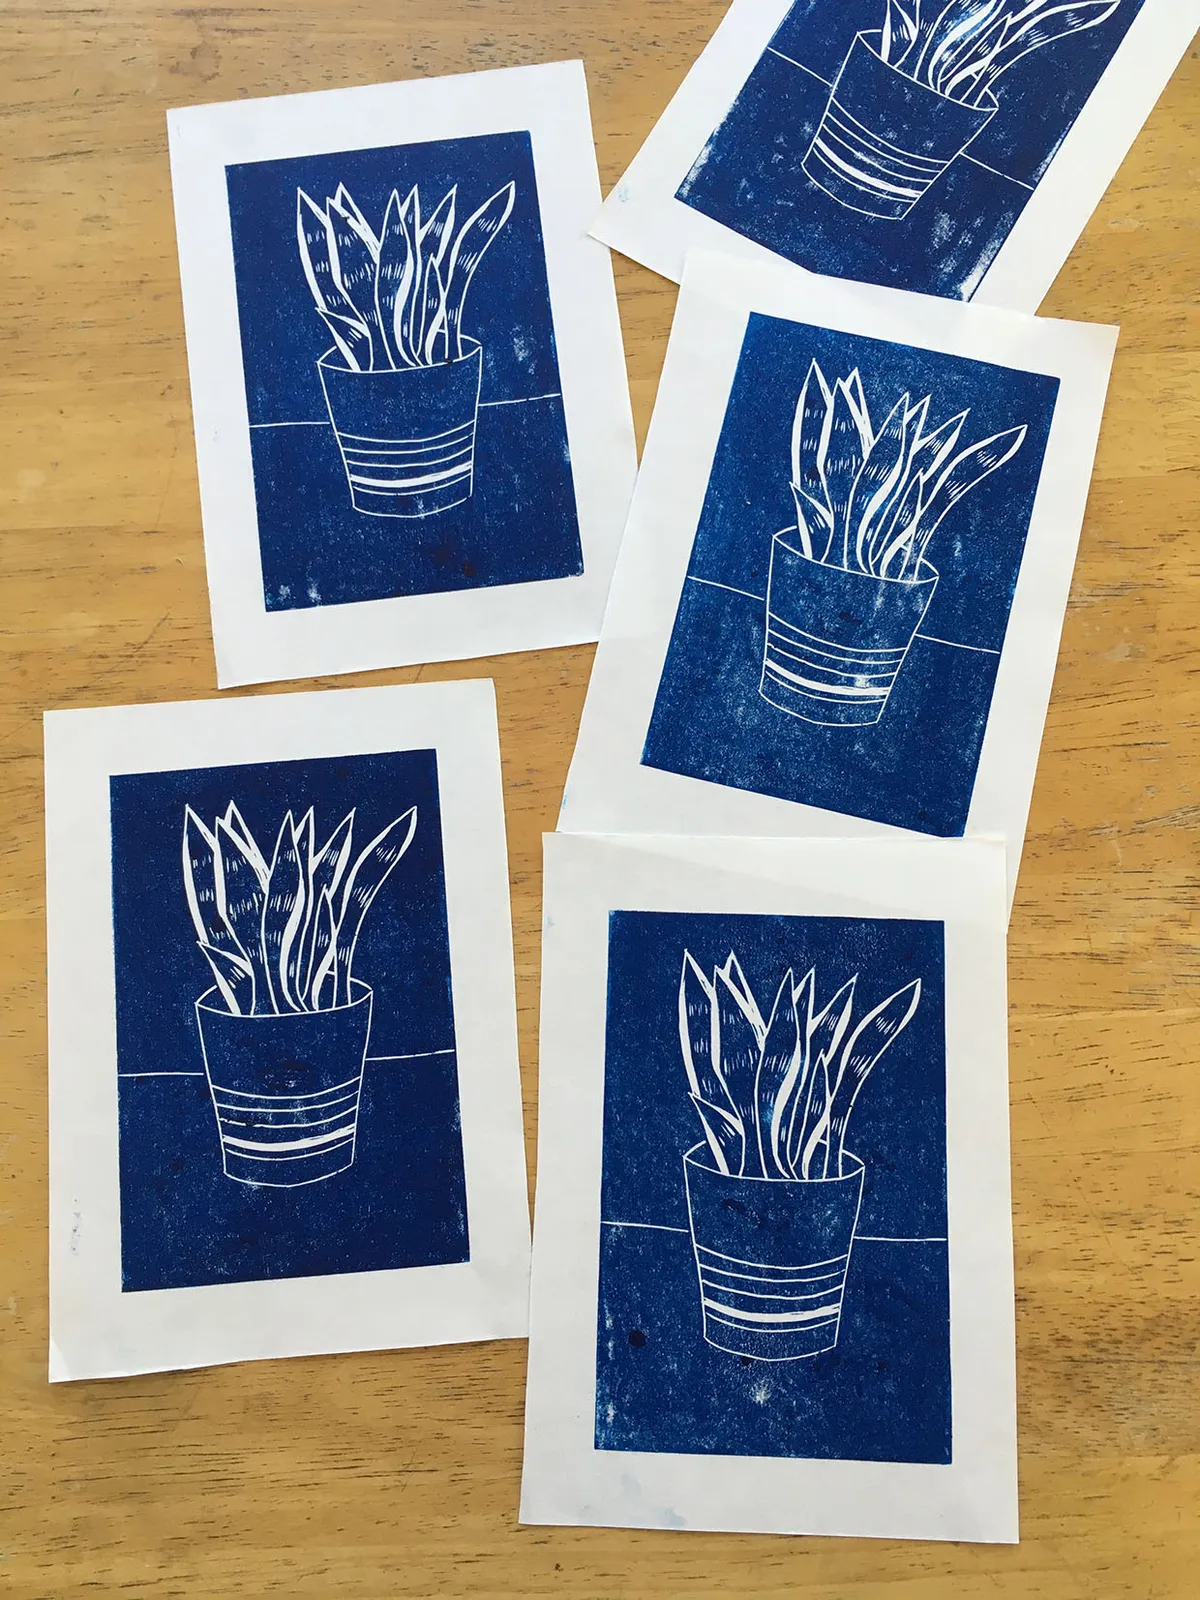 Linocut printmaking - which is the best lino to use? Beginner friendly